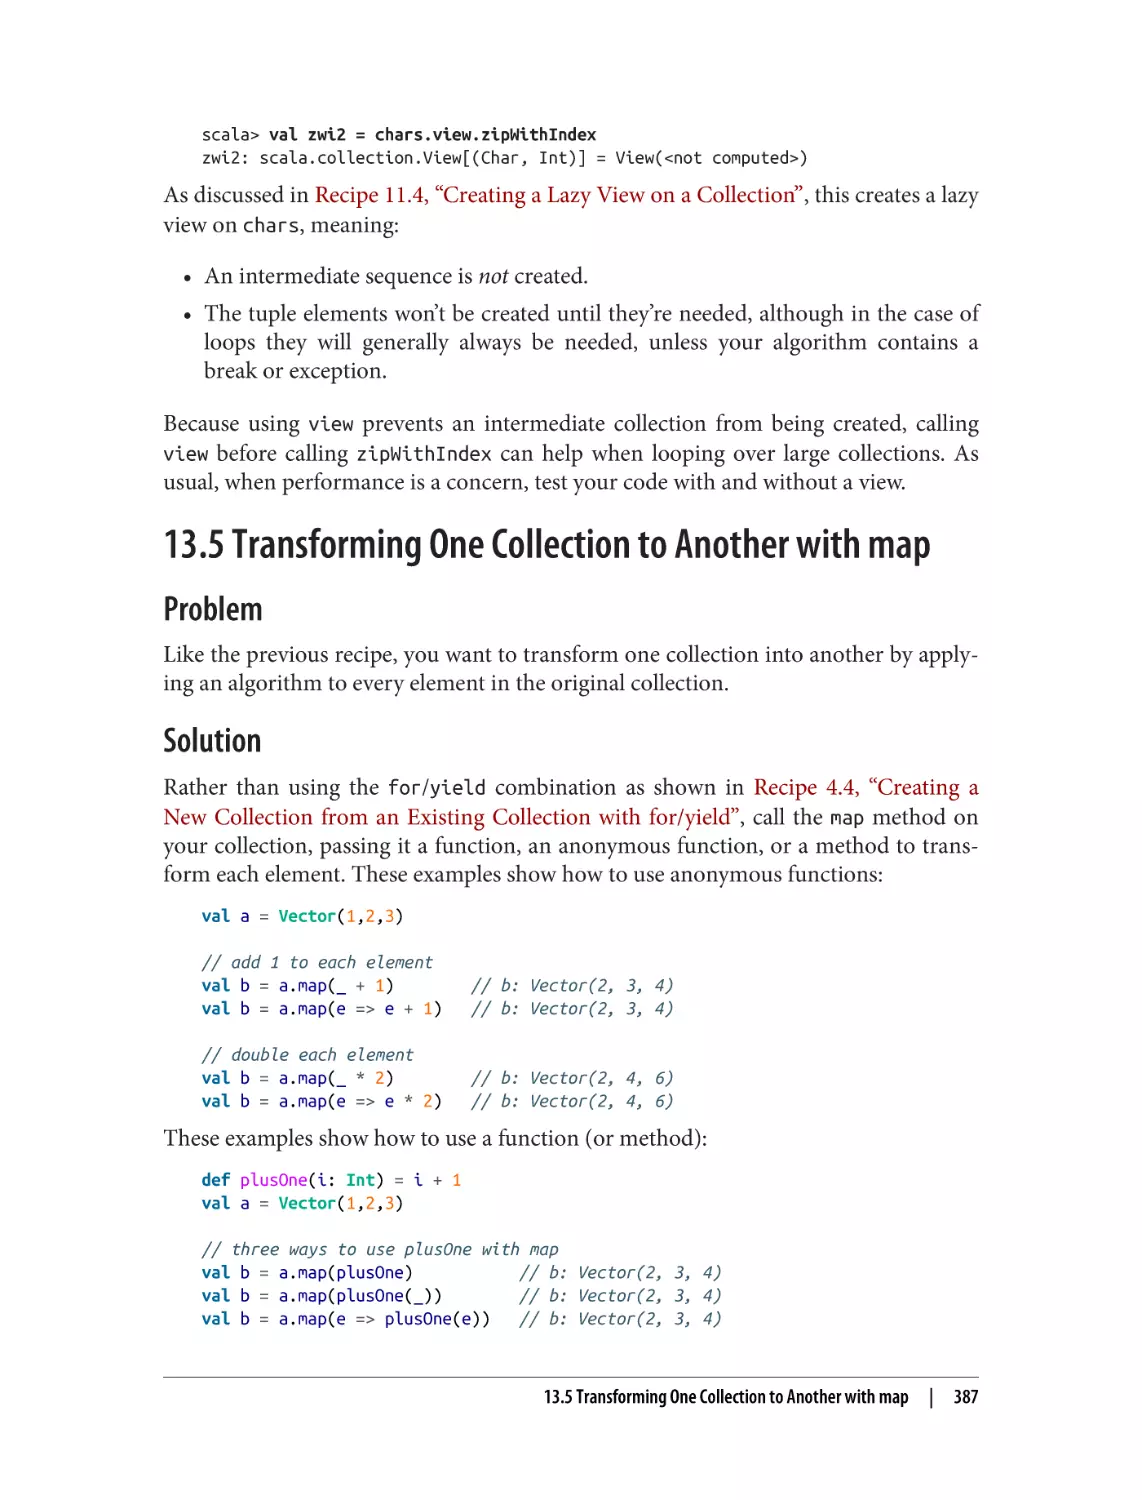 13.5 Transforming One Collection to Another with map
Problem
Solution